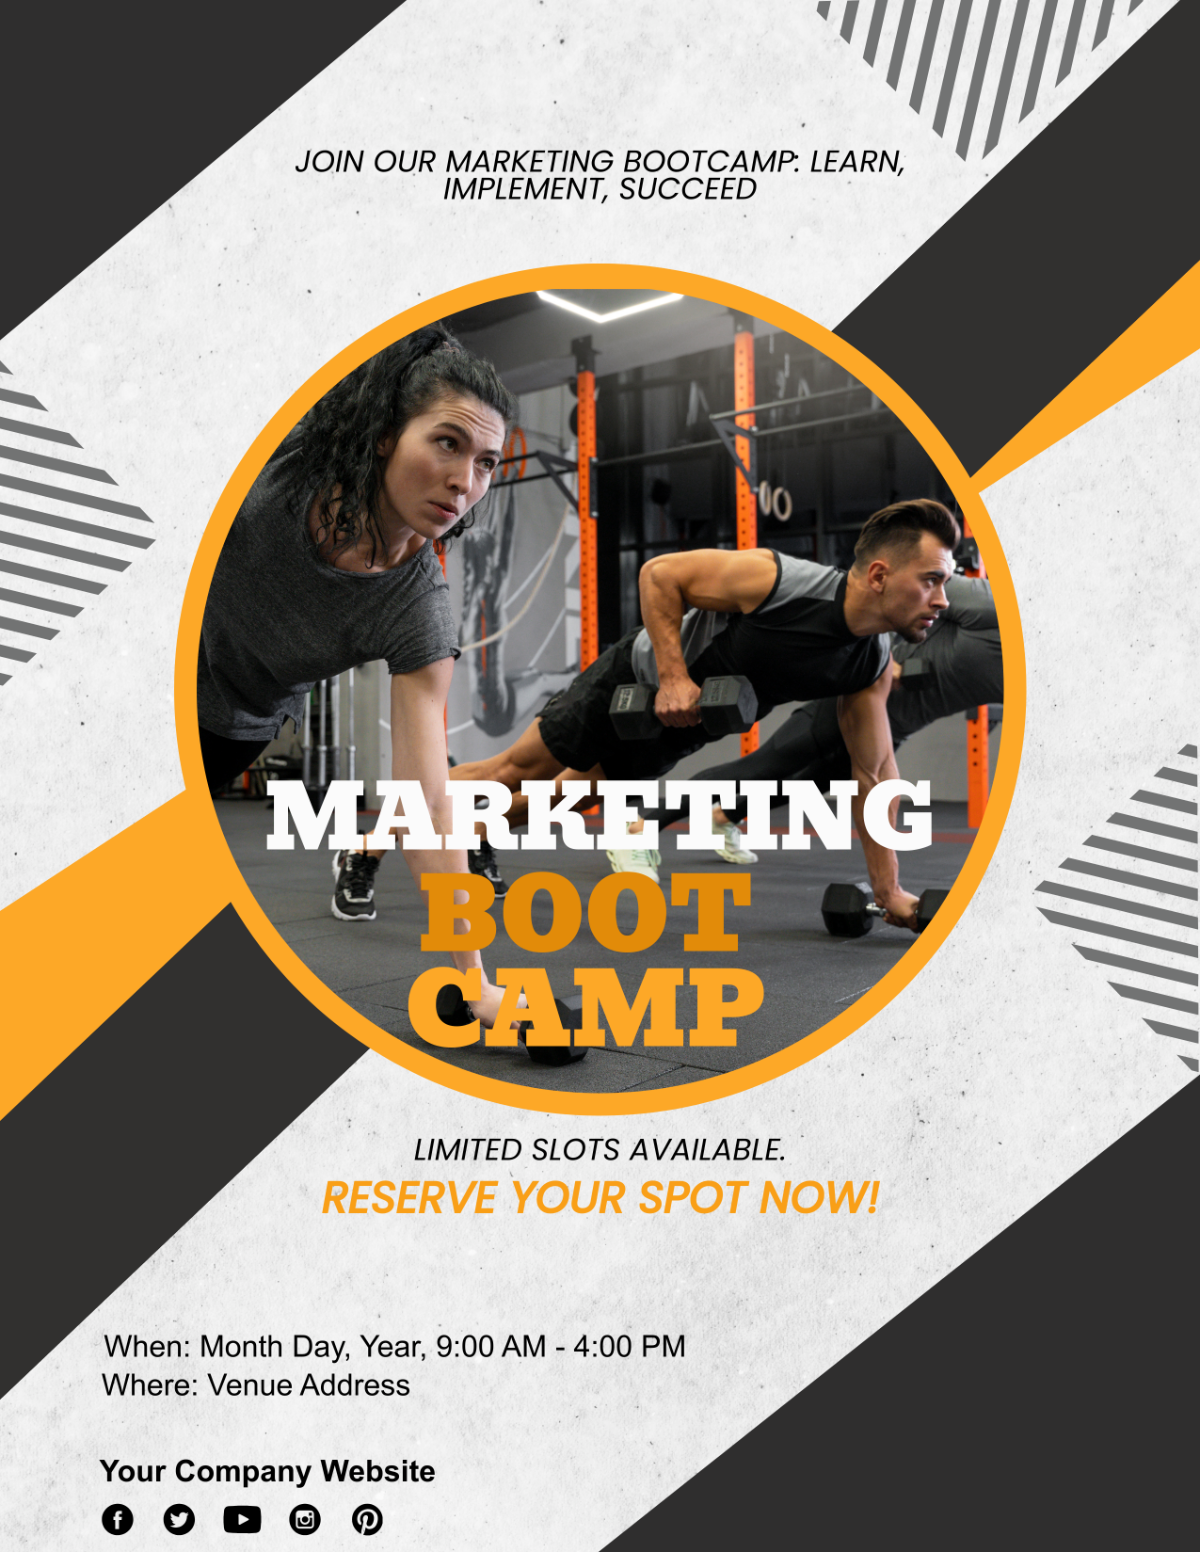 Marketing Bootcamp Flyer Template